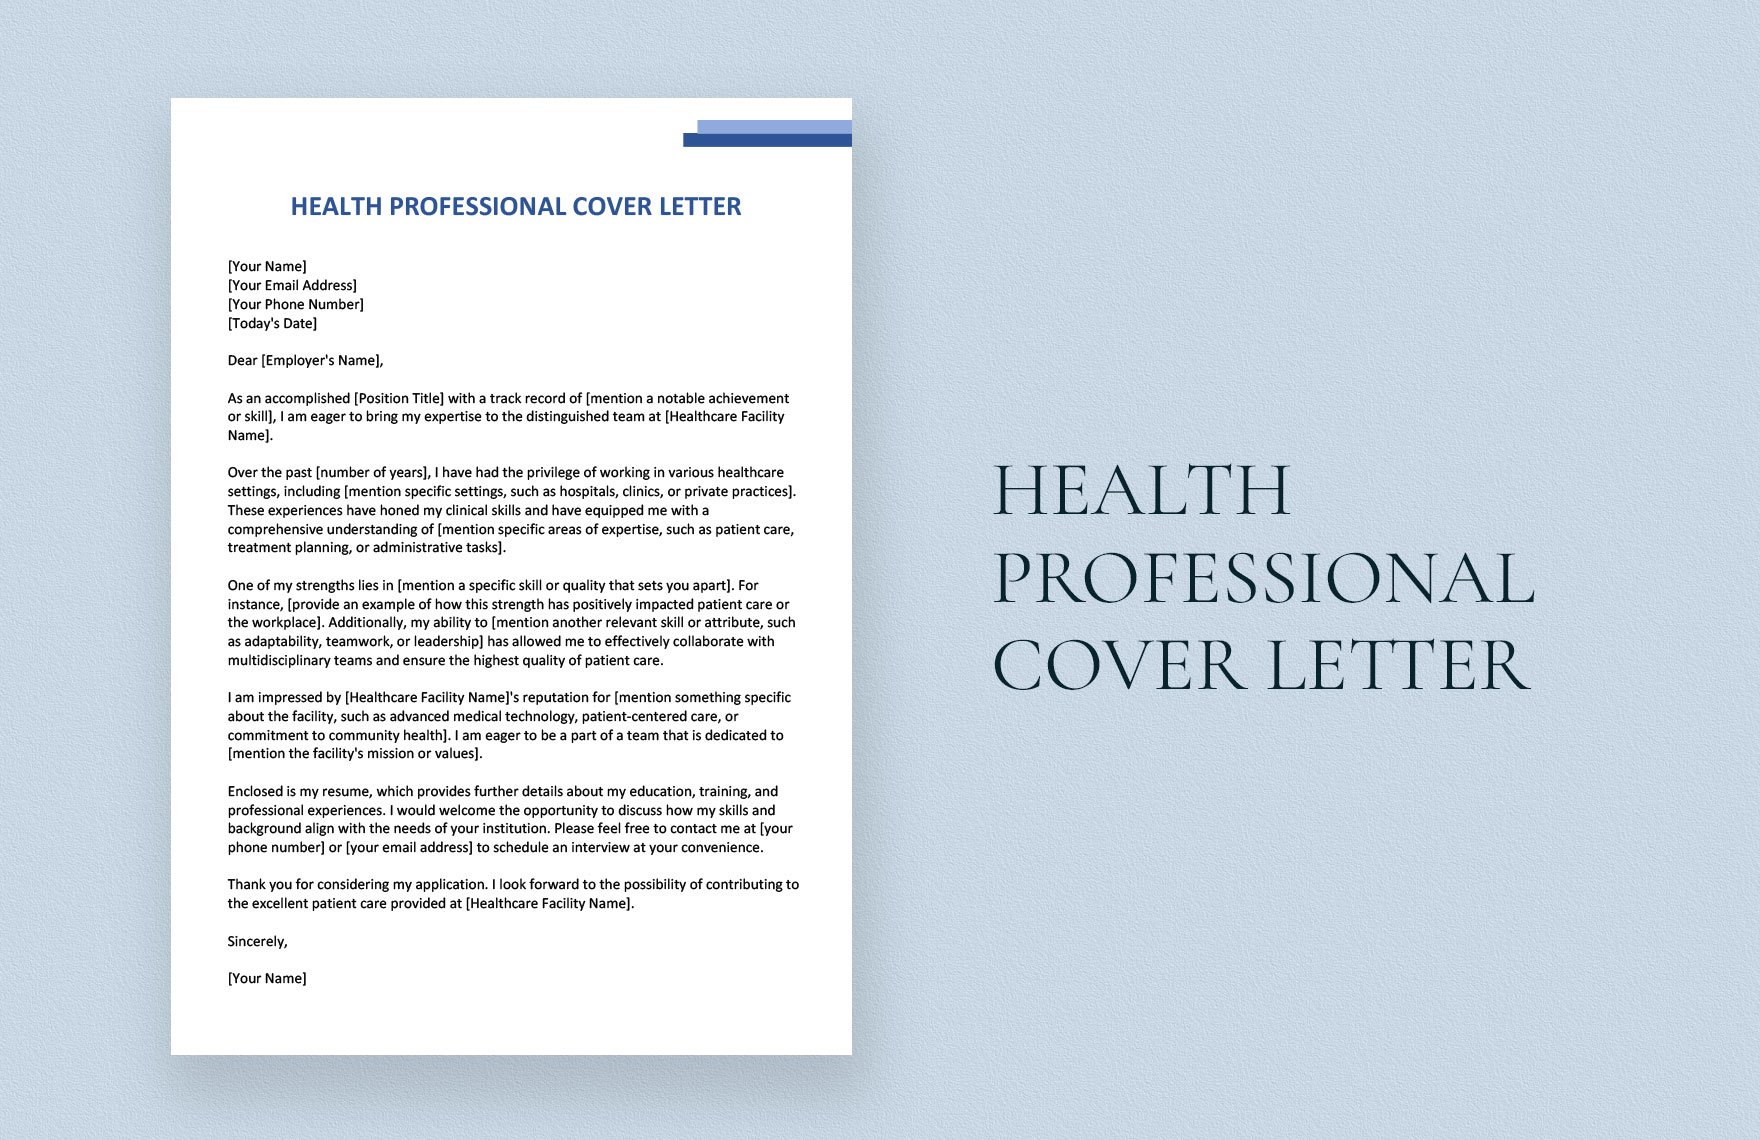 Health Professional Cover Letter